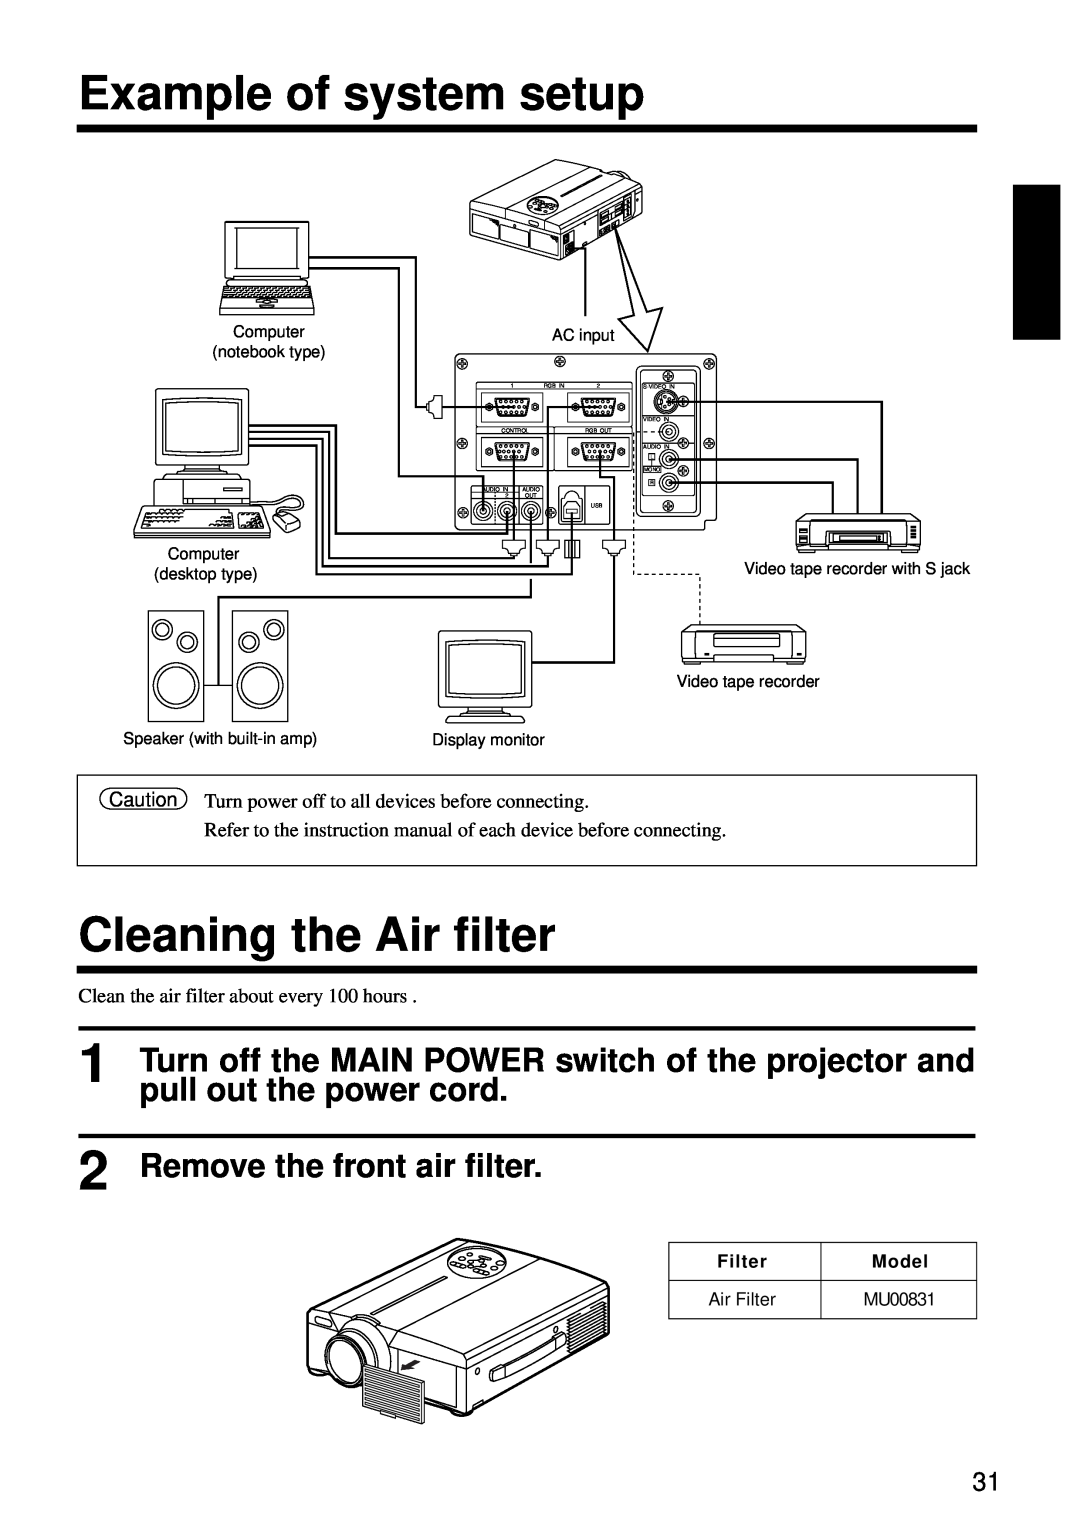 Hitachi CP-X960W Example of system setup, Cleaning the Air filter, pull out the power cord, Remove the front air filter 